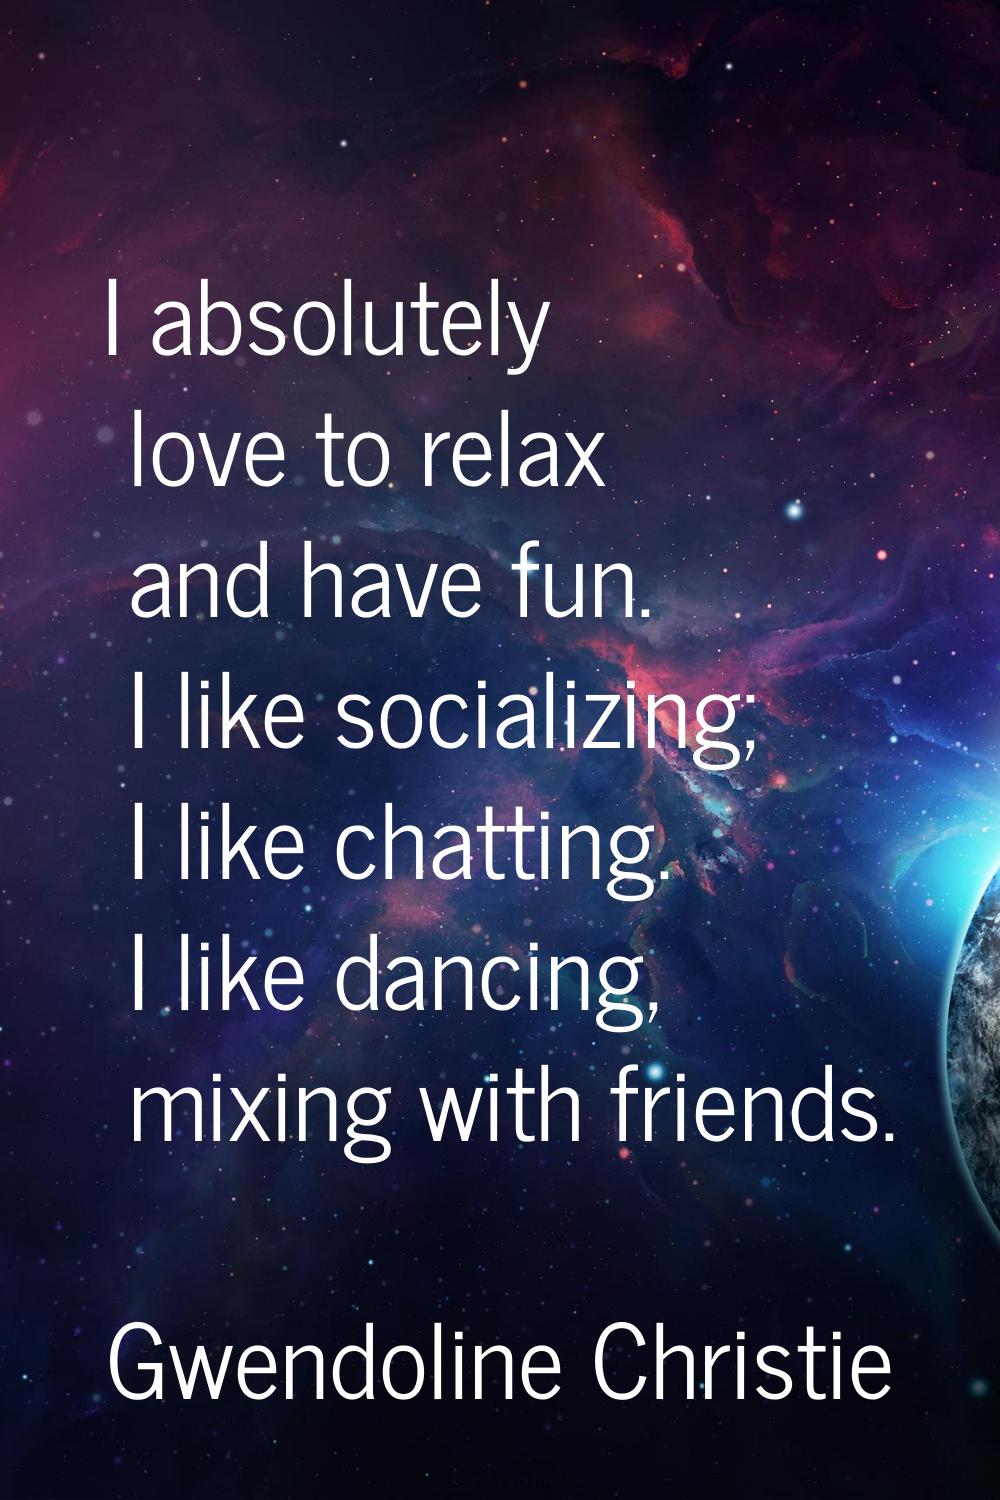 I absolutely love to relax and have fun. I like socializing; I like chatting. I like dancing, mixin